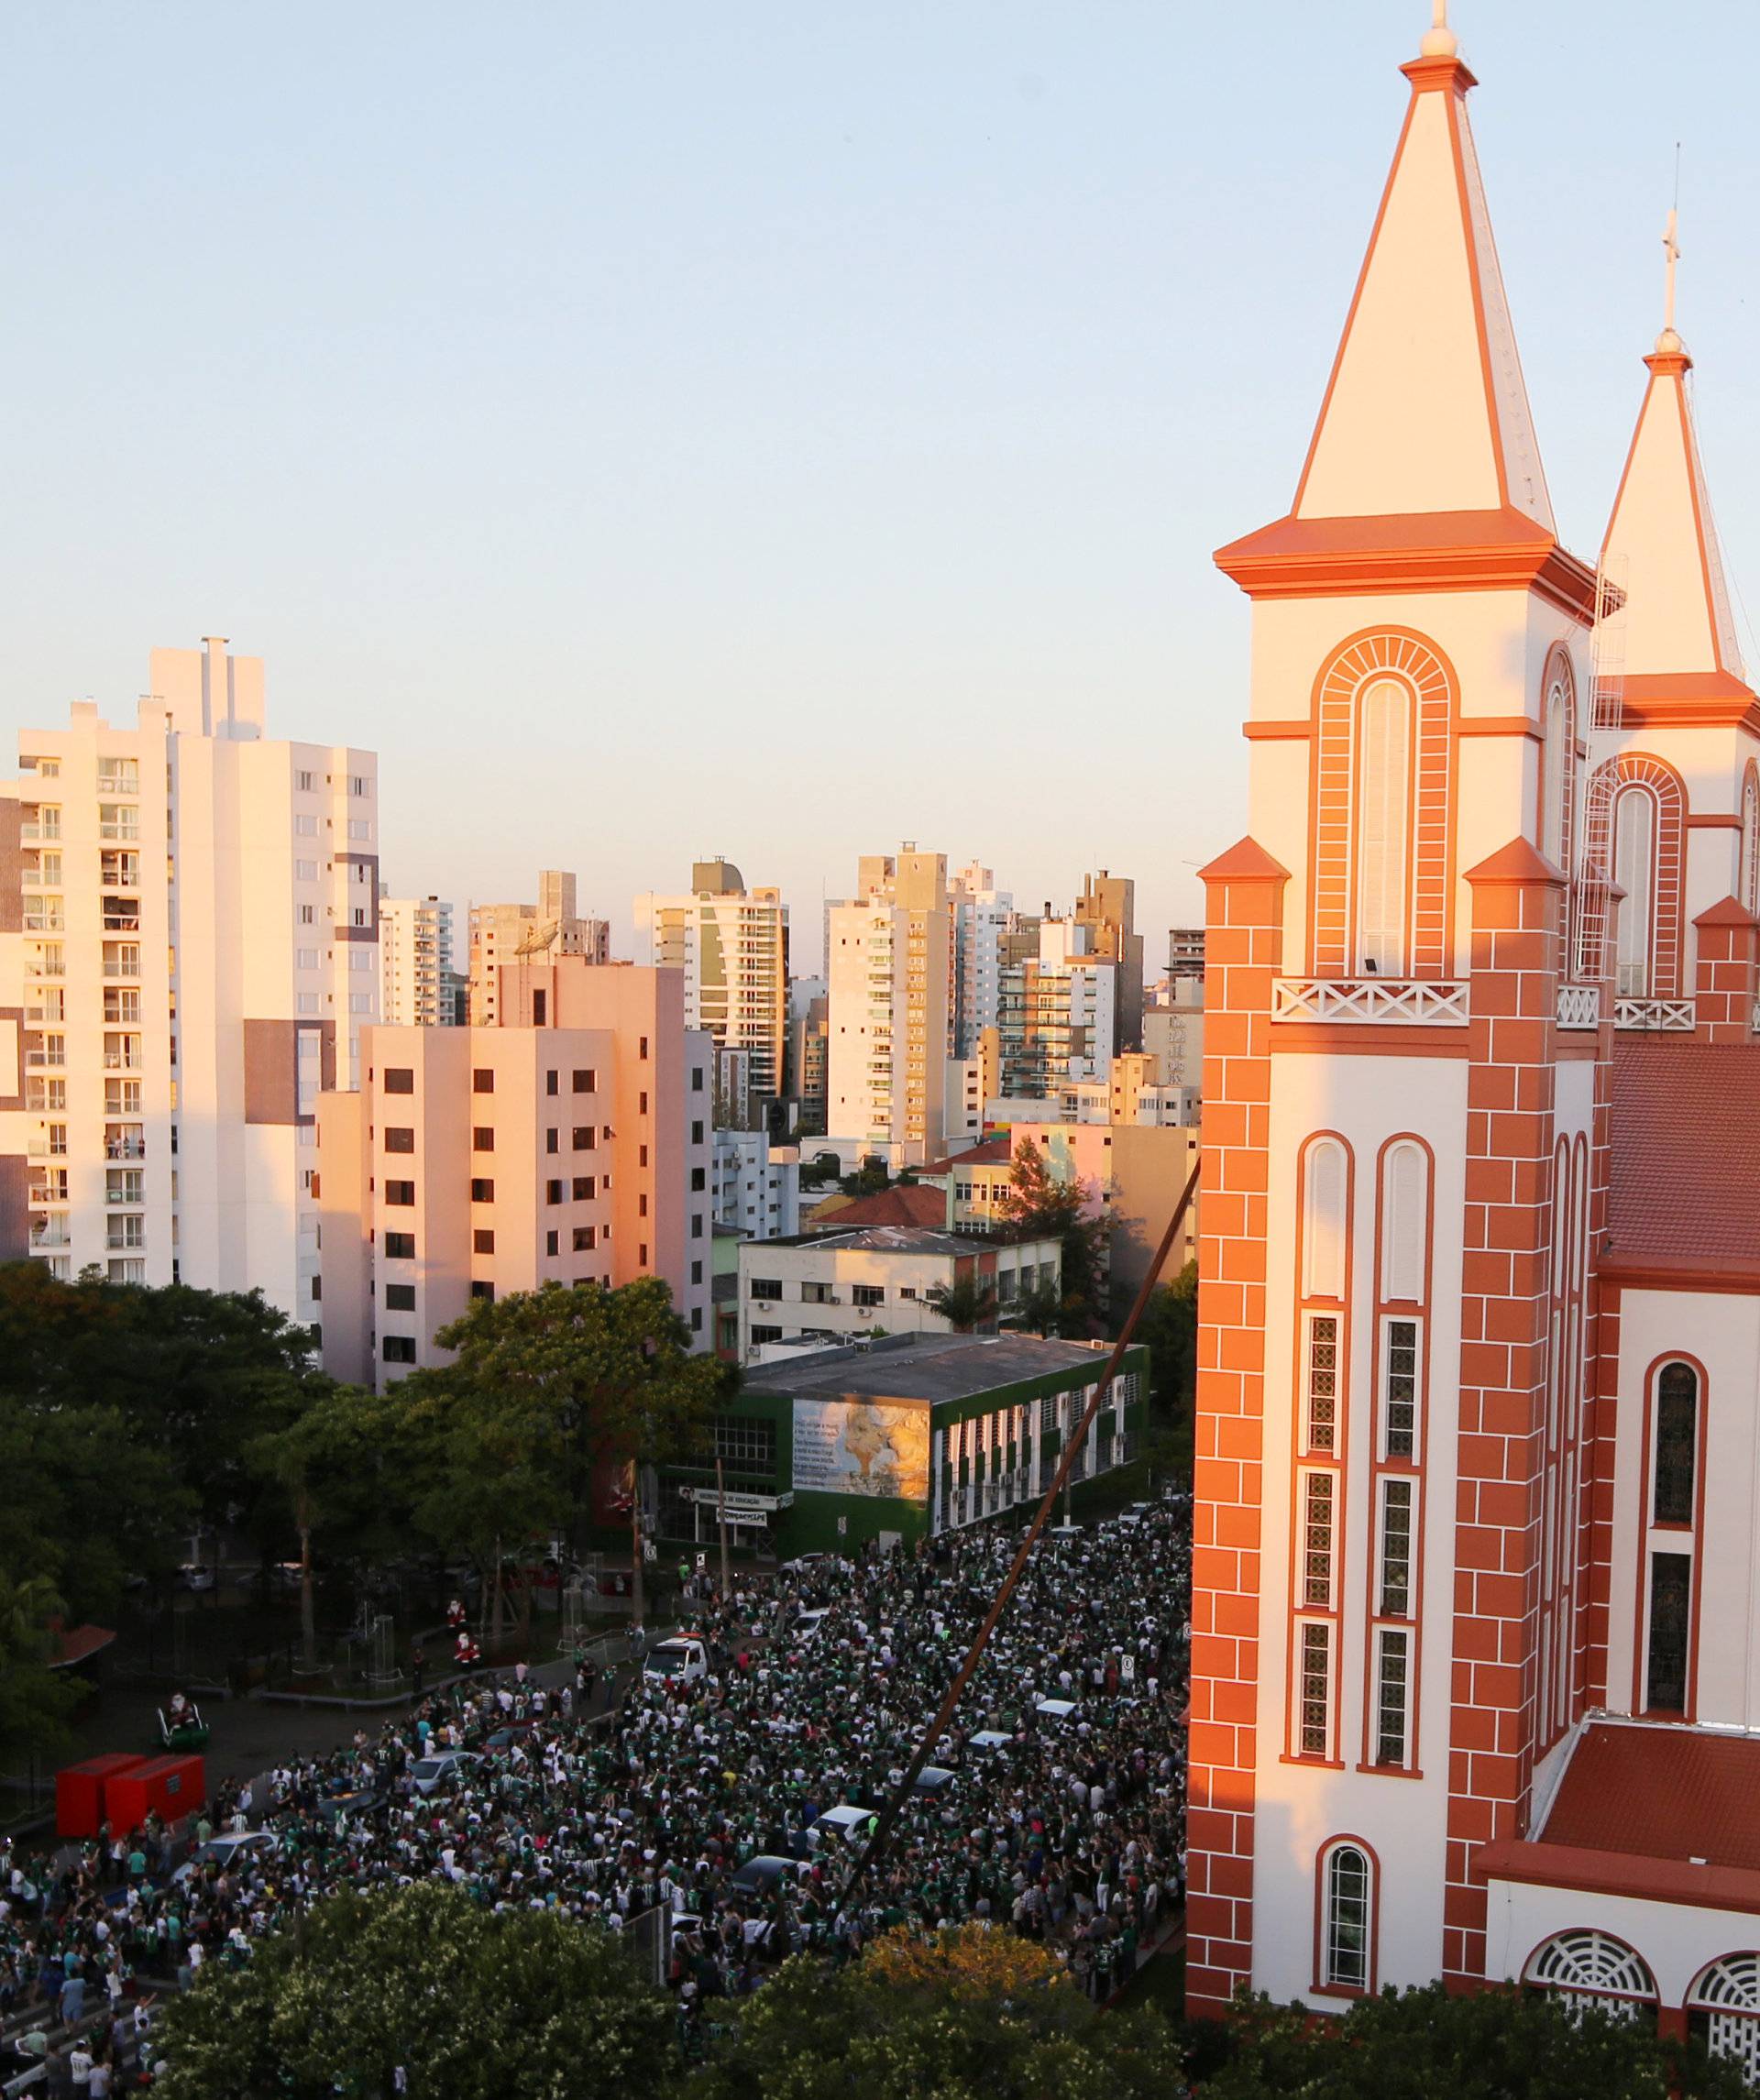 Fans of Chapecoense soccer team gather in the streets to pay tribute to their players in Chapeco